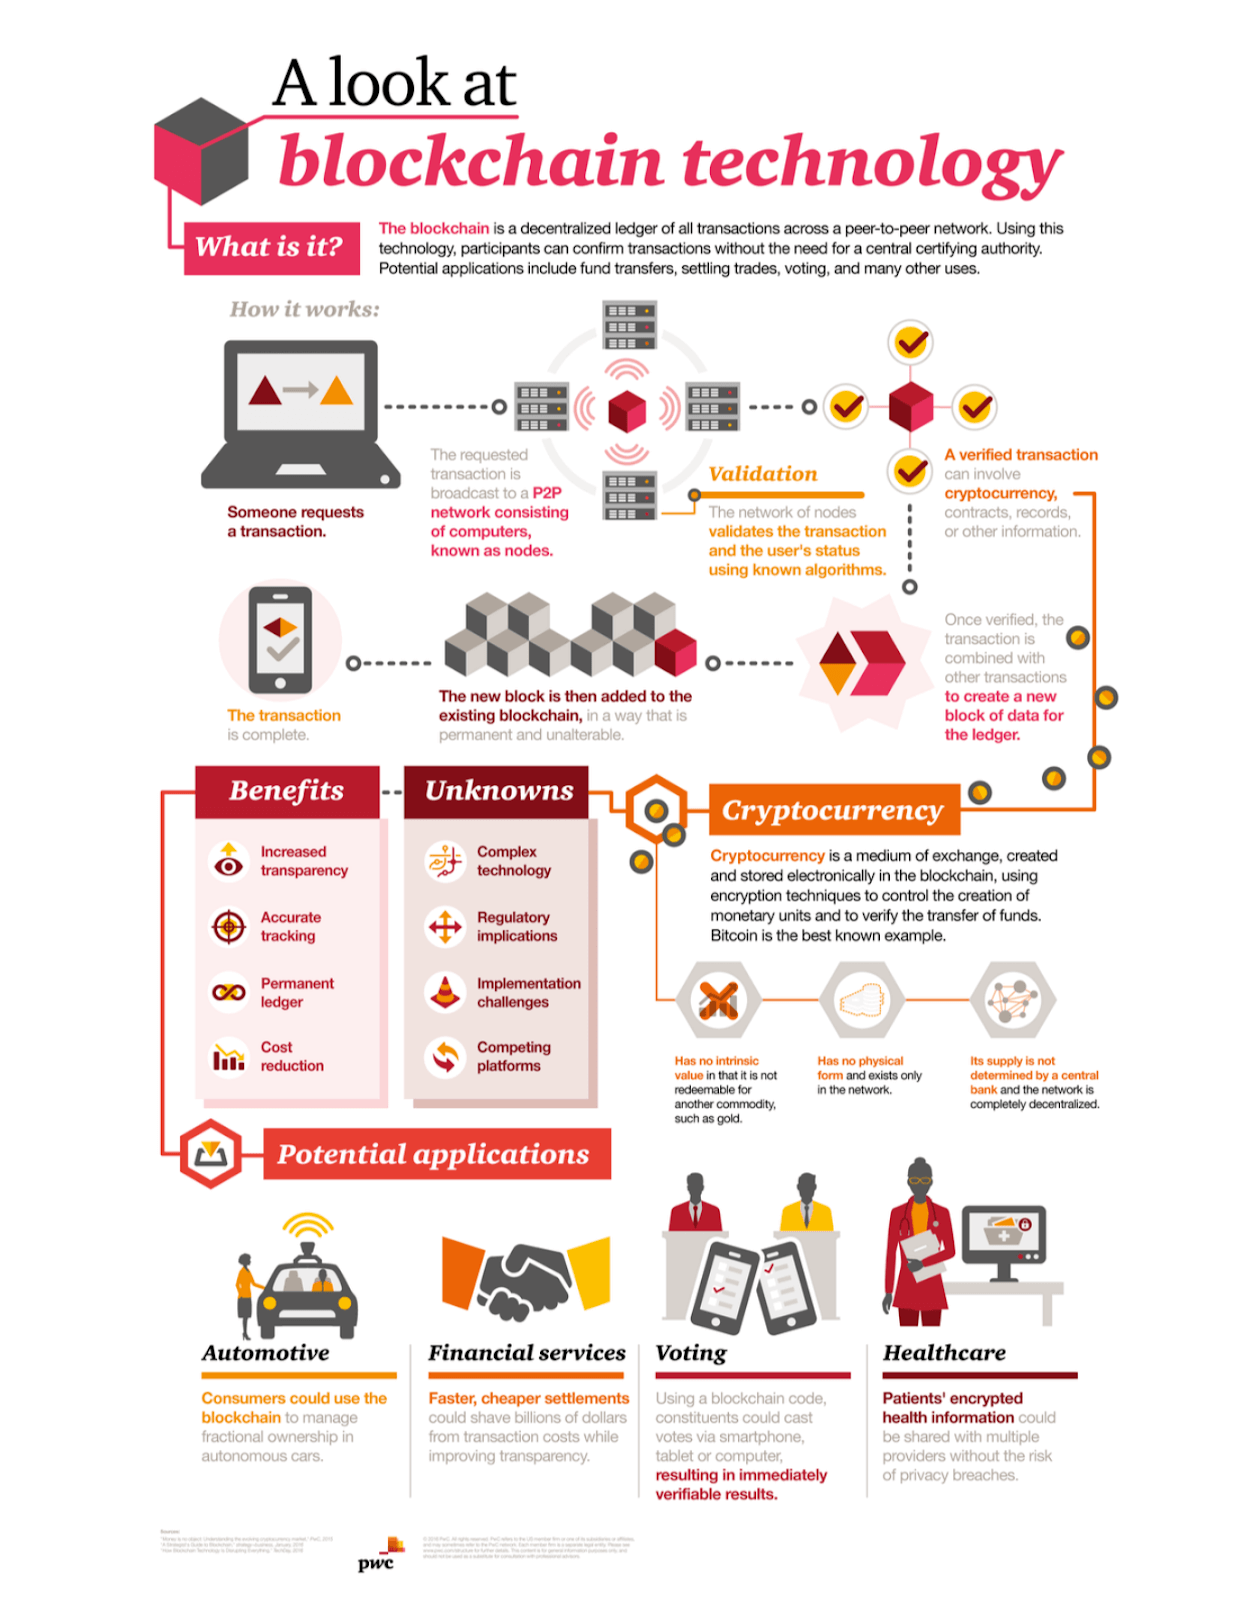 blockchain technology applications infographic